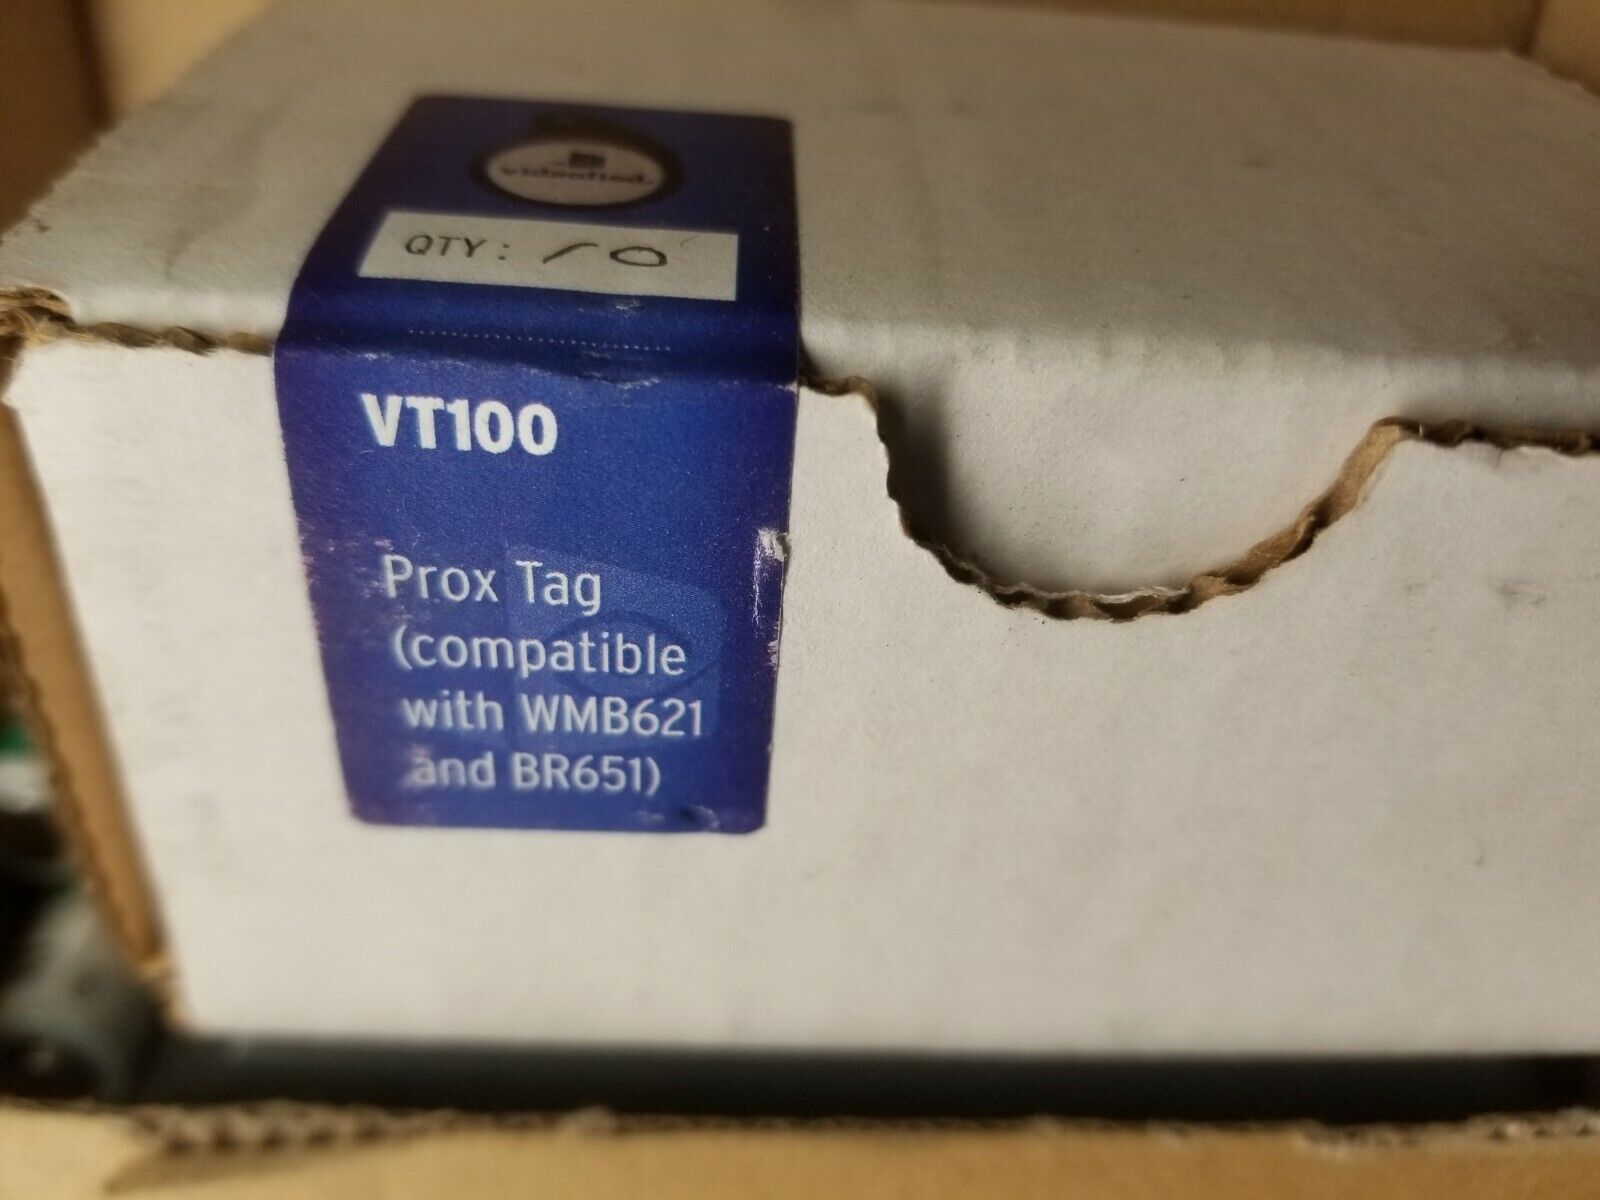 Videofied / RSI Technologies VT100 Prox Tag (10 Pack)